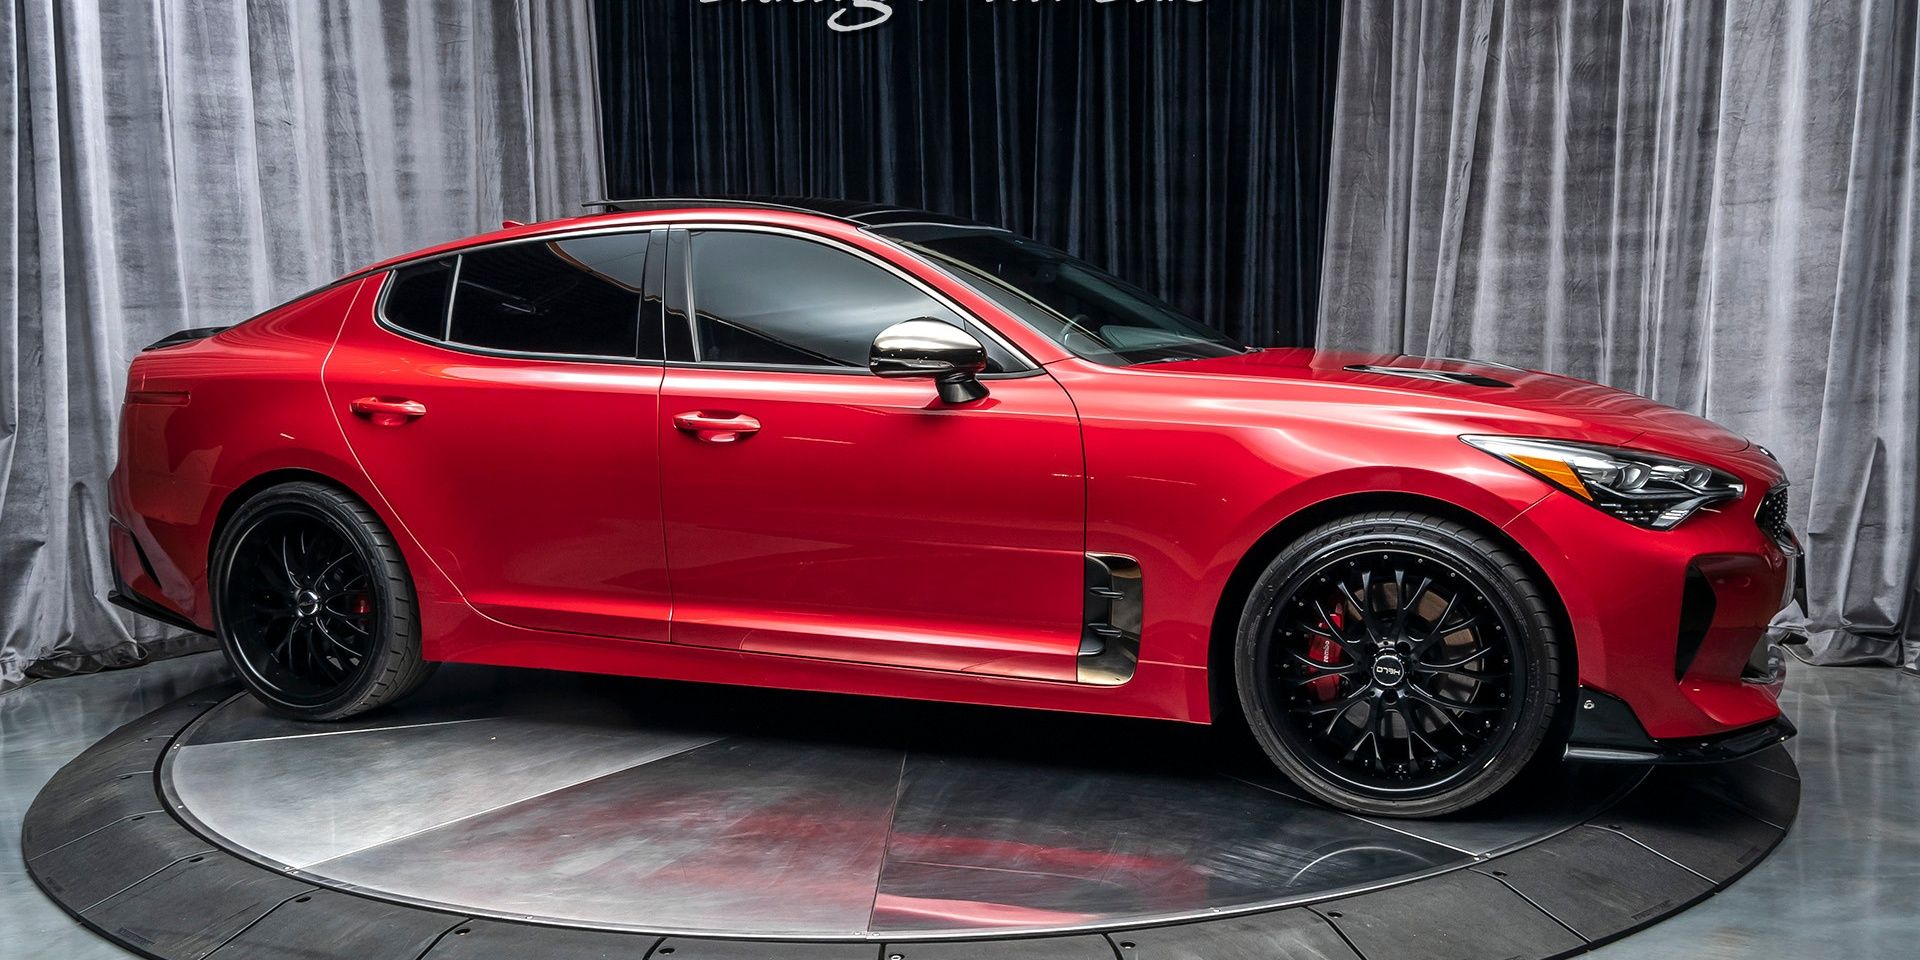 5 Reasons Why We Would Buy A Kia Stinger (5 Reasons Why We Would Rather ...